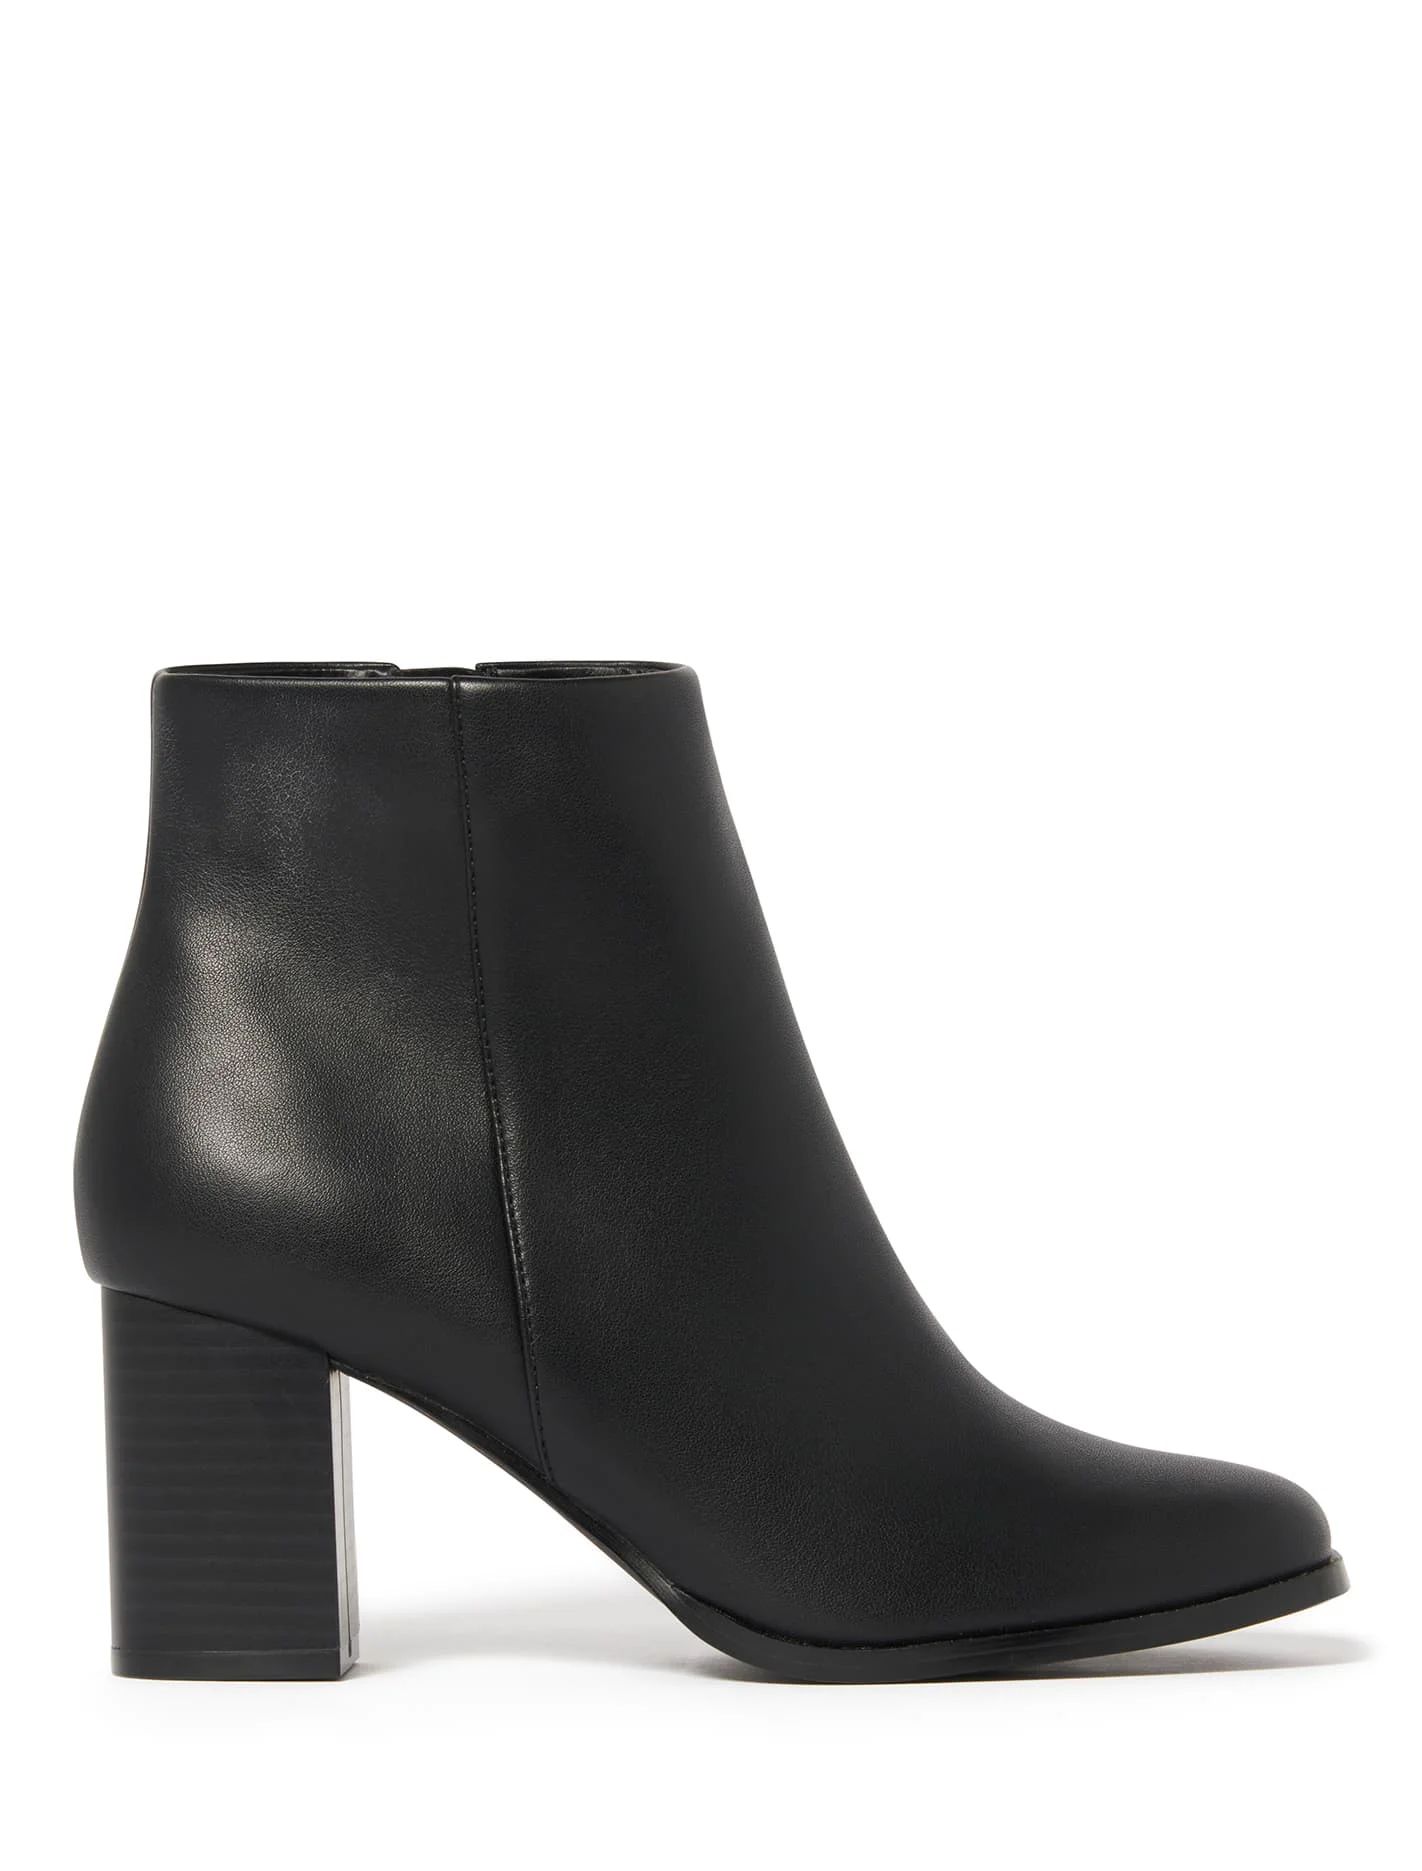 April Block Heel Boots | Forever New (AU)